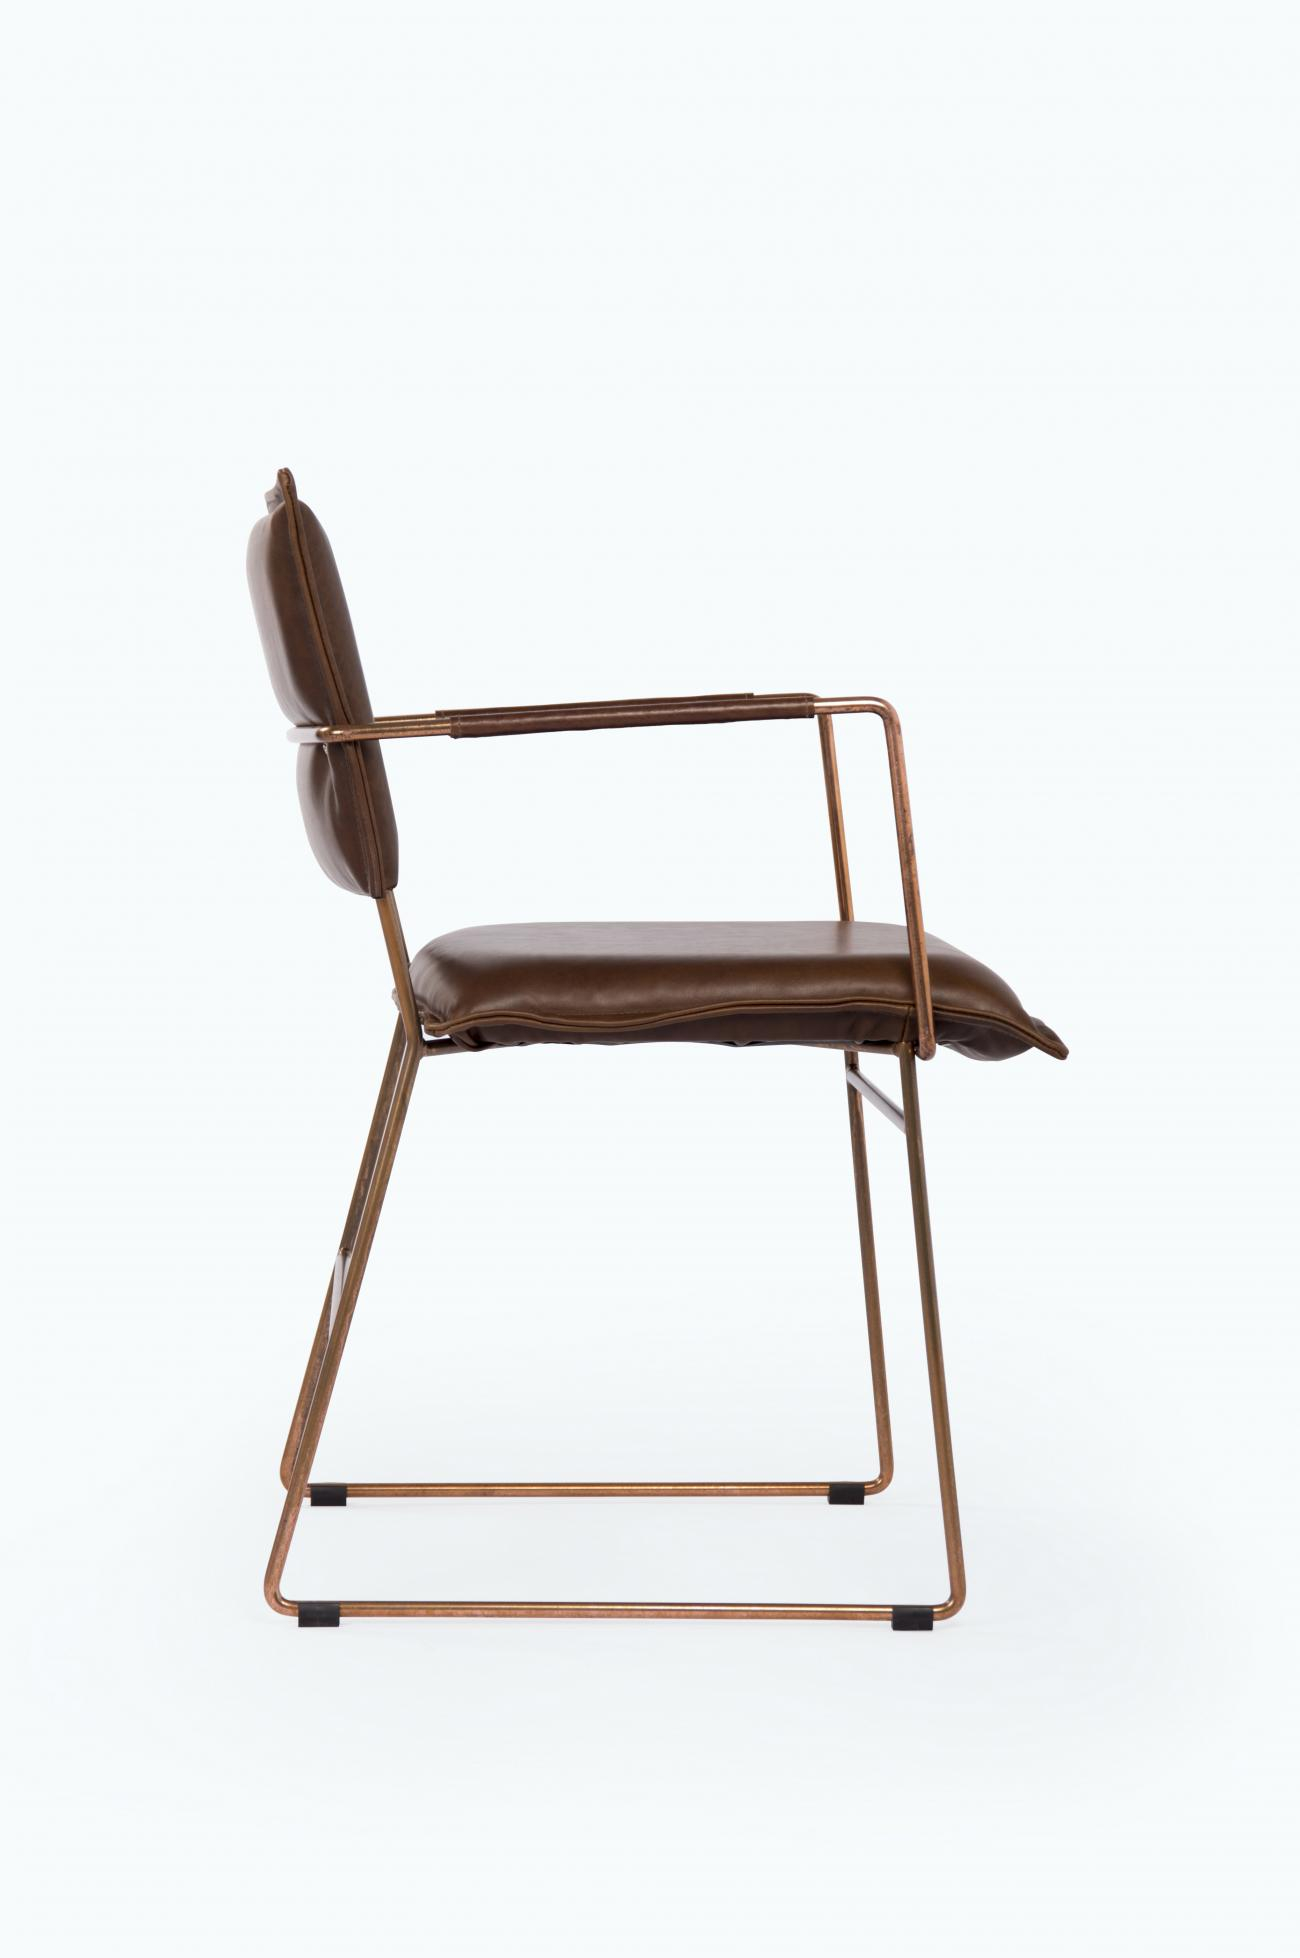 https://www.fundesign.nl/media/catalog/product/n/o/norman_diningchair_without_arm_copper_frame_luxor_fango_side_3_.jpg